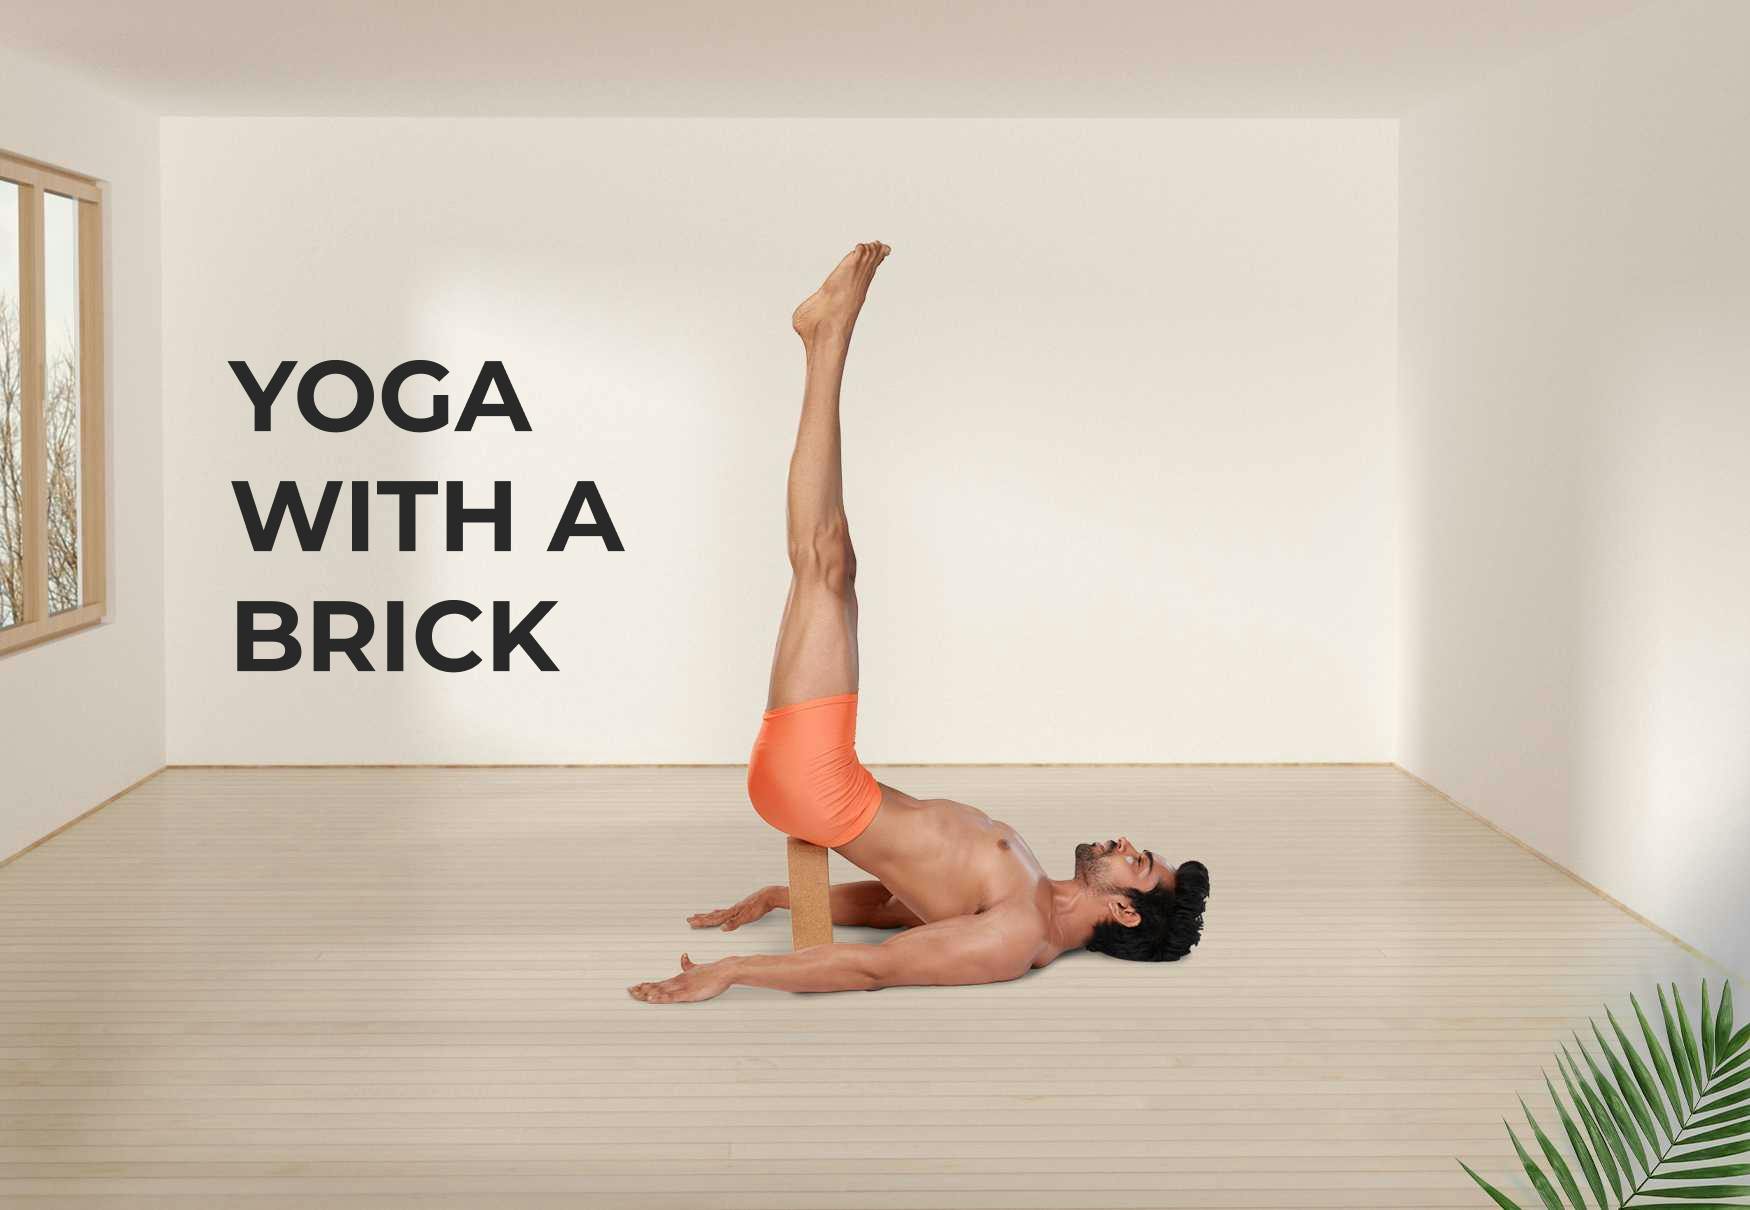 YOGA WITH A BRICK